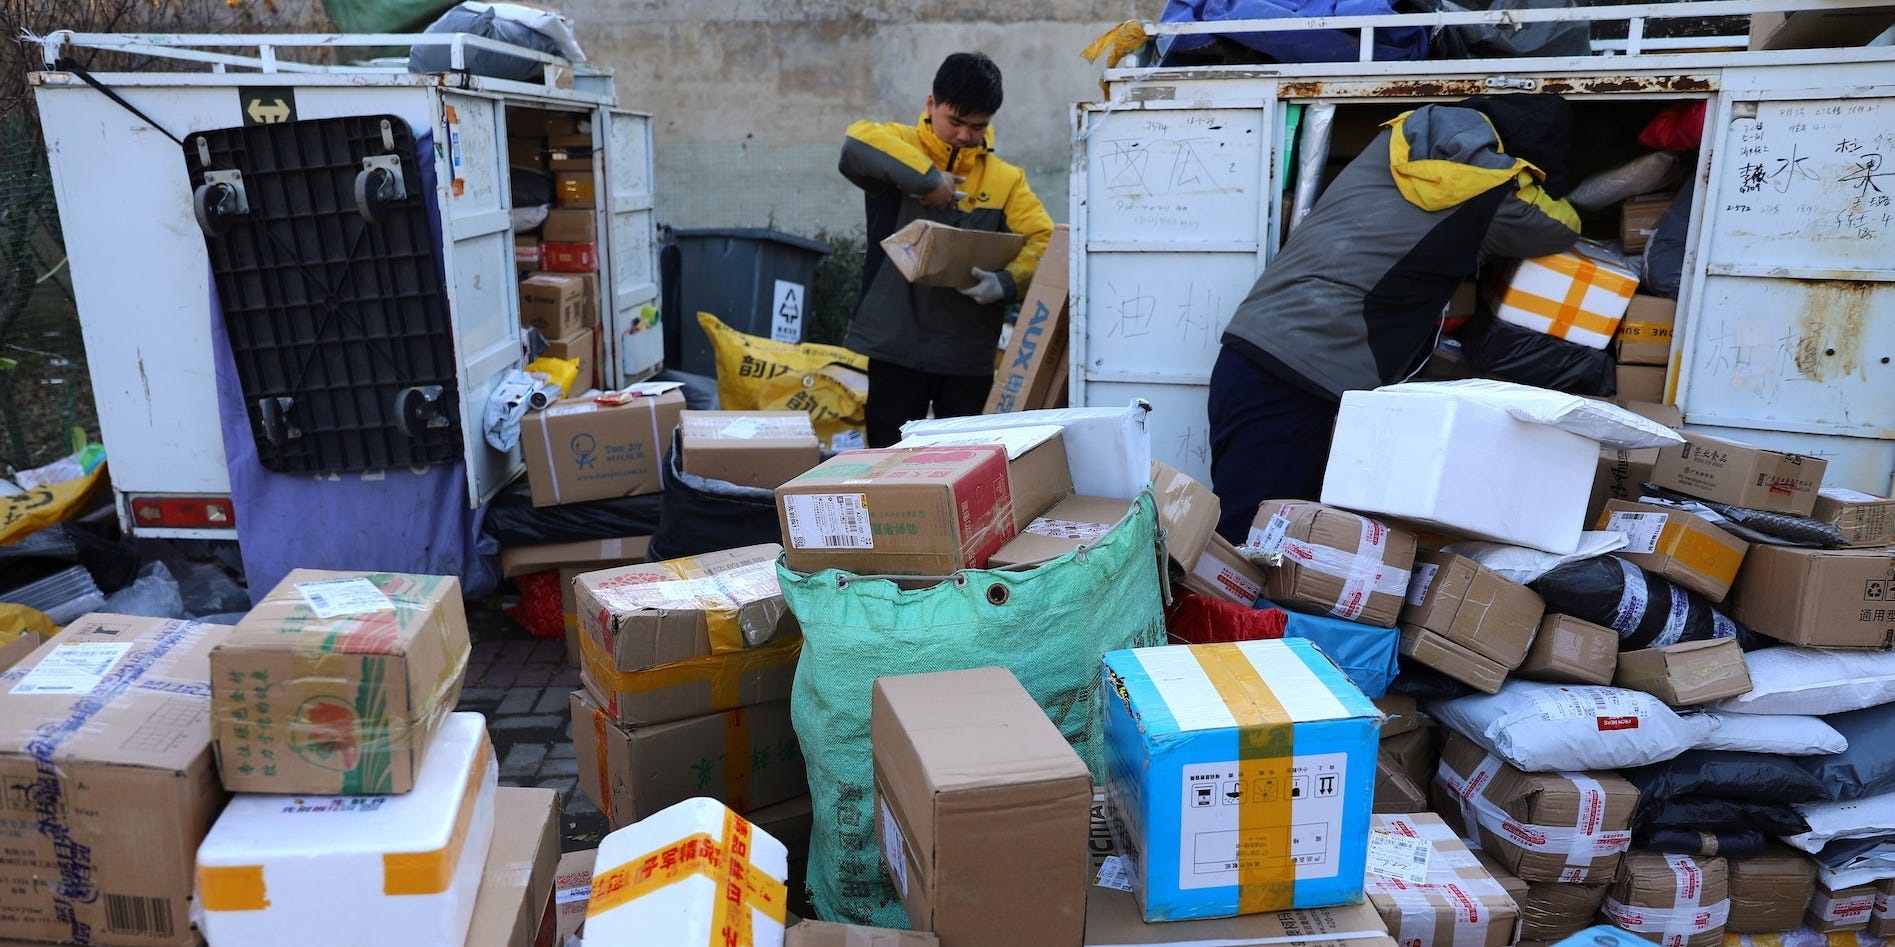 Delivery workers sort parcels at a makeshift logistics station in Beijing, China. REUTERS/Tingshu Wang